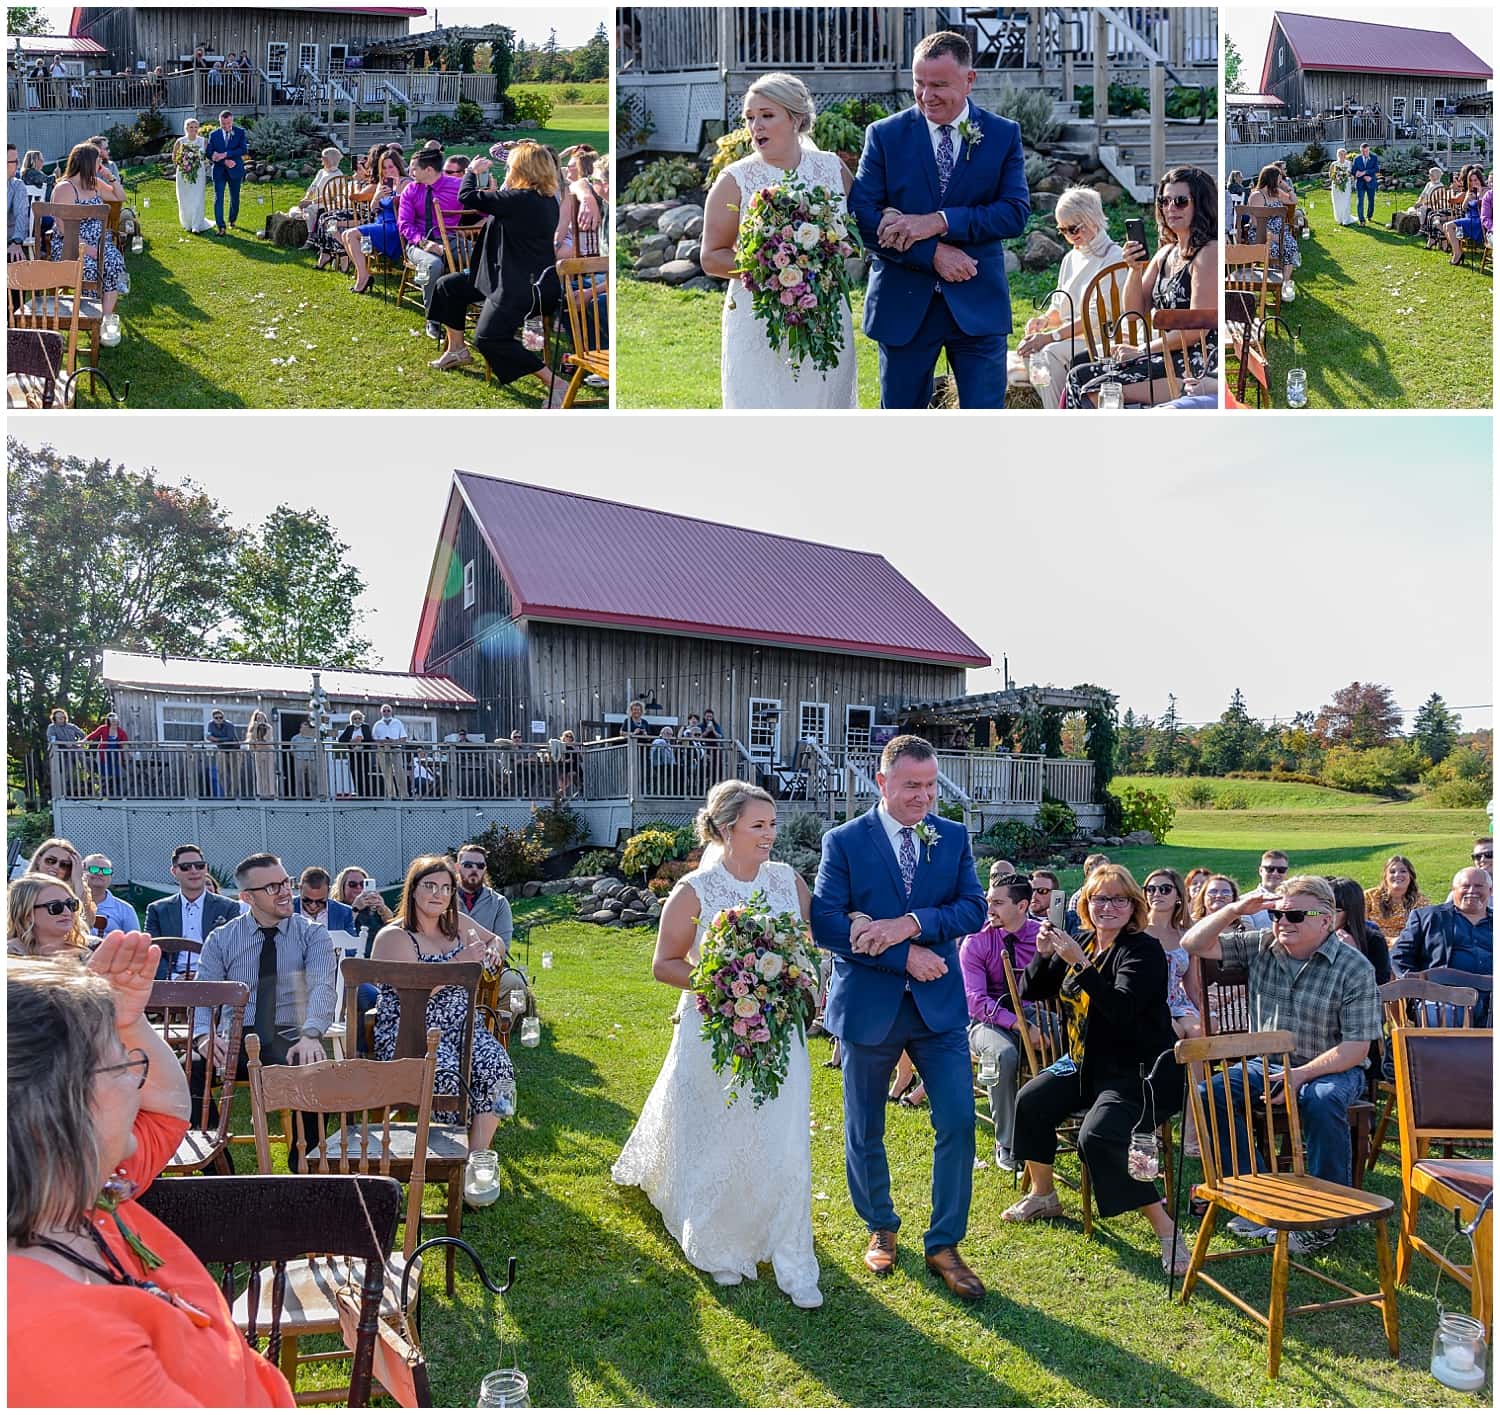 The bride walks down the aisle with her father at her rustic barn wedding at the Barn at the Sadie Belle Farm in NS.